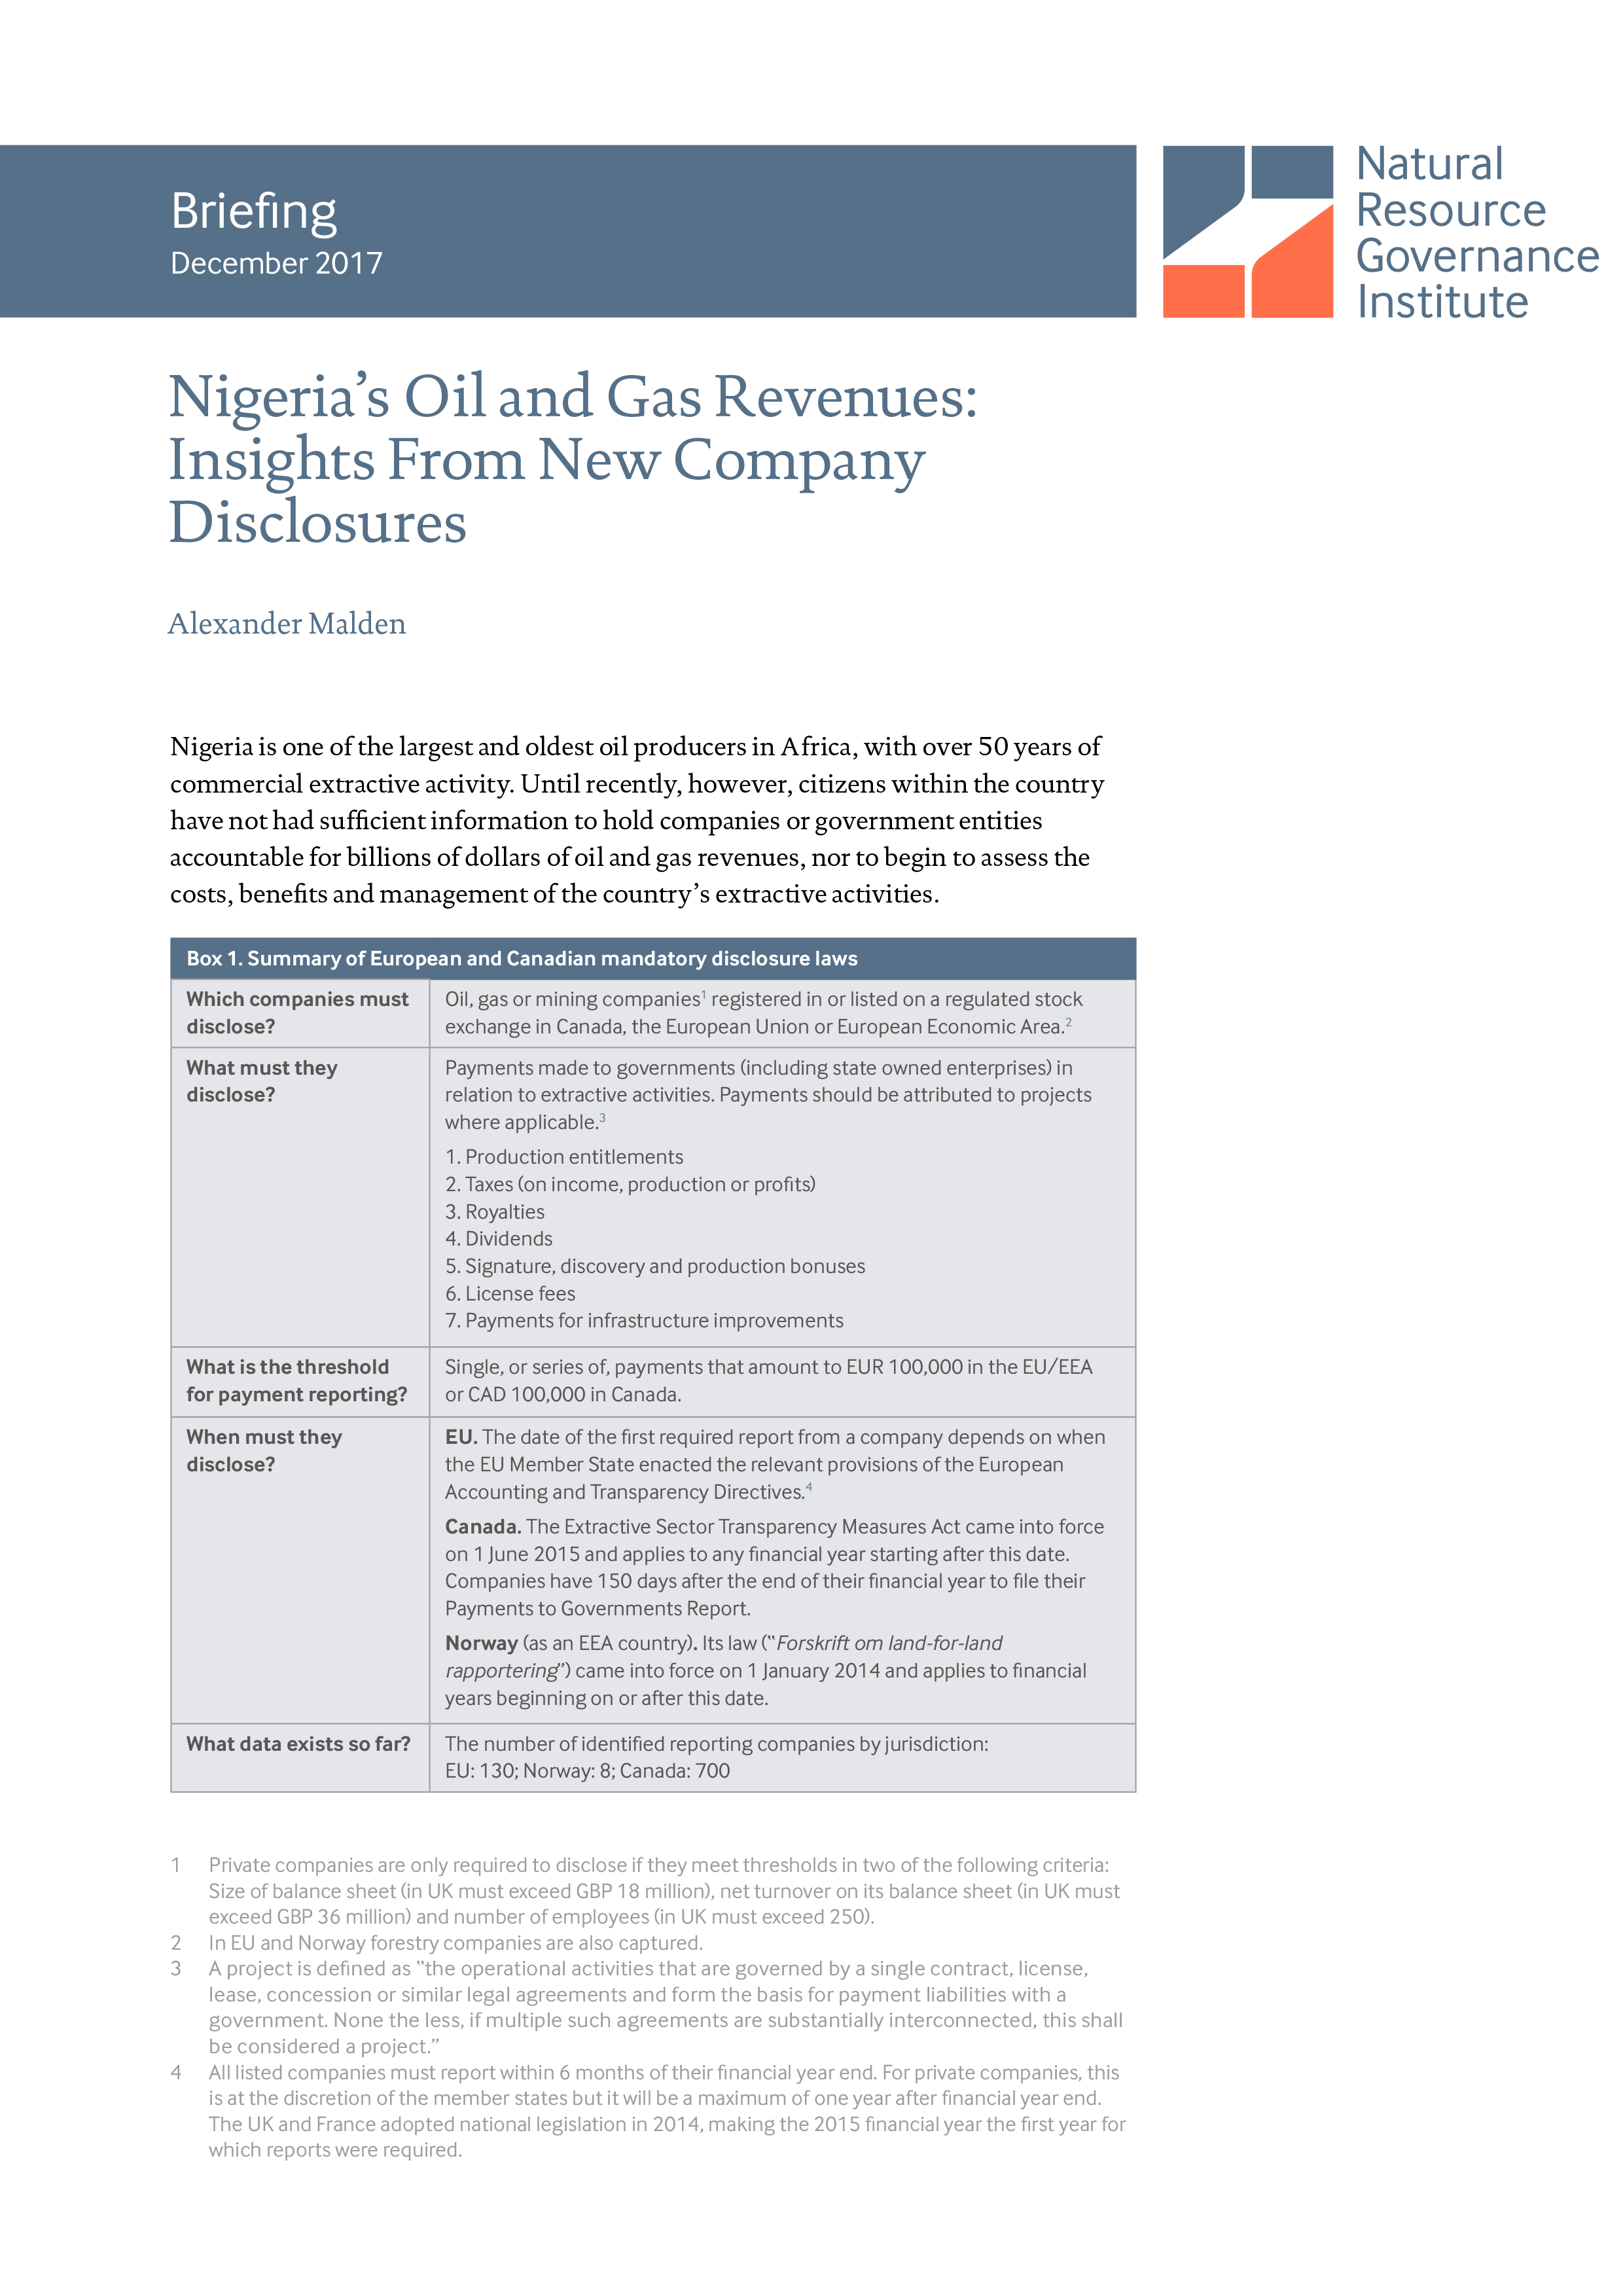 Nigeria’s Oil and Gas Revenues: Insights from New Company Disclosures